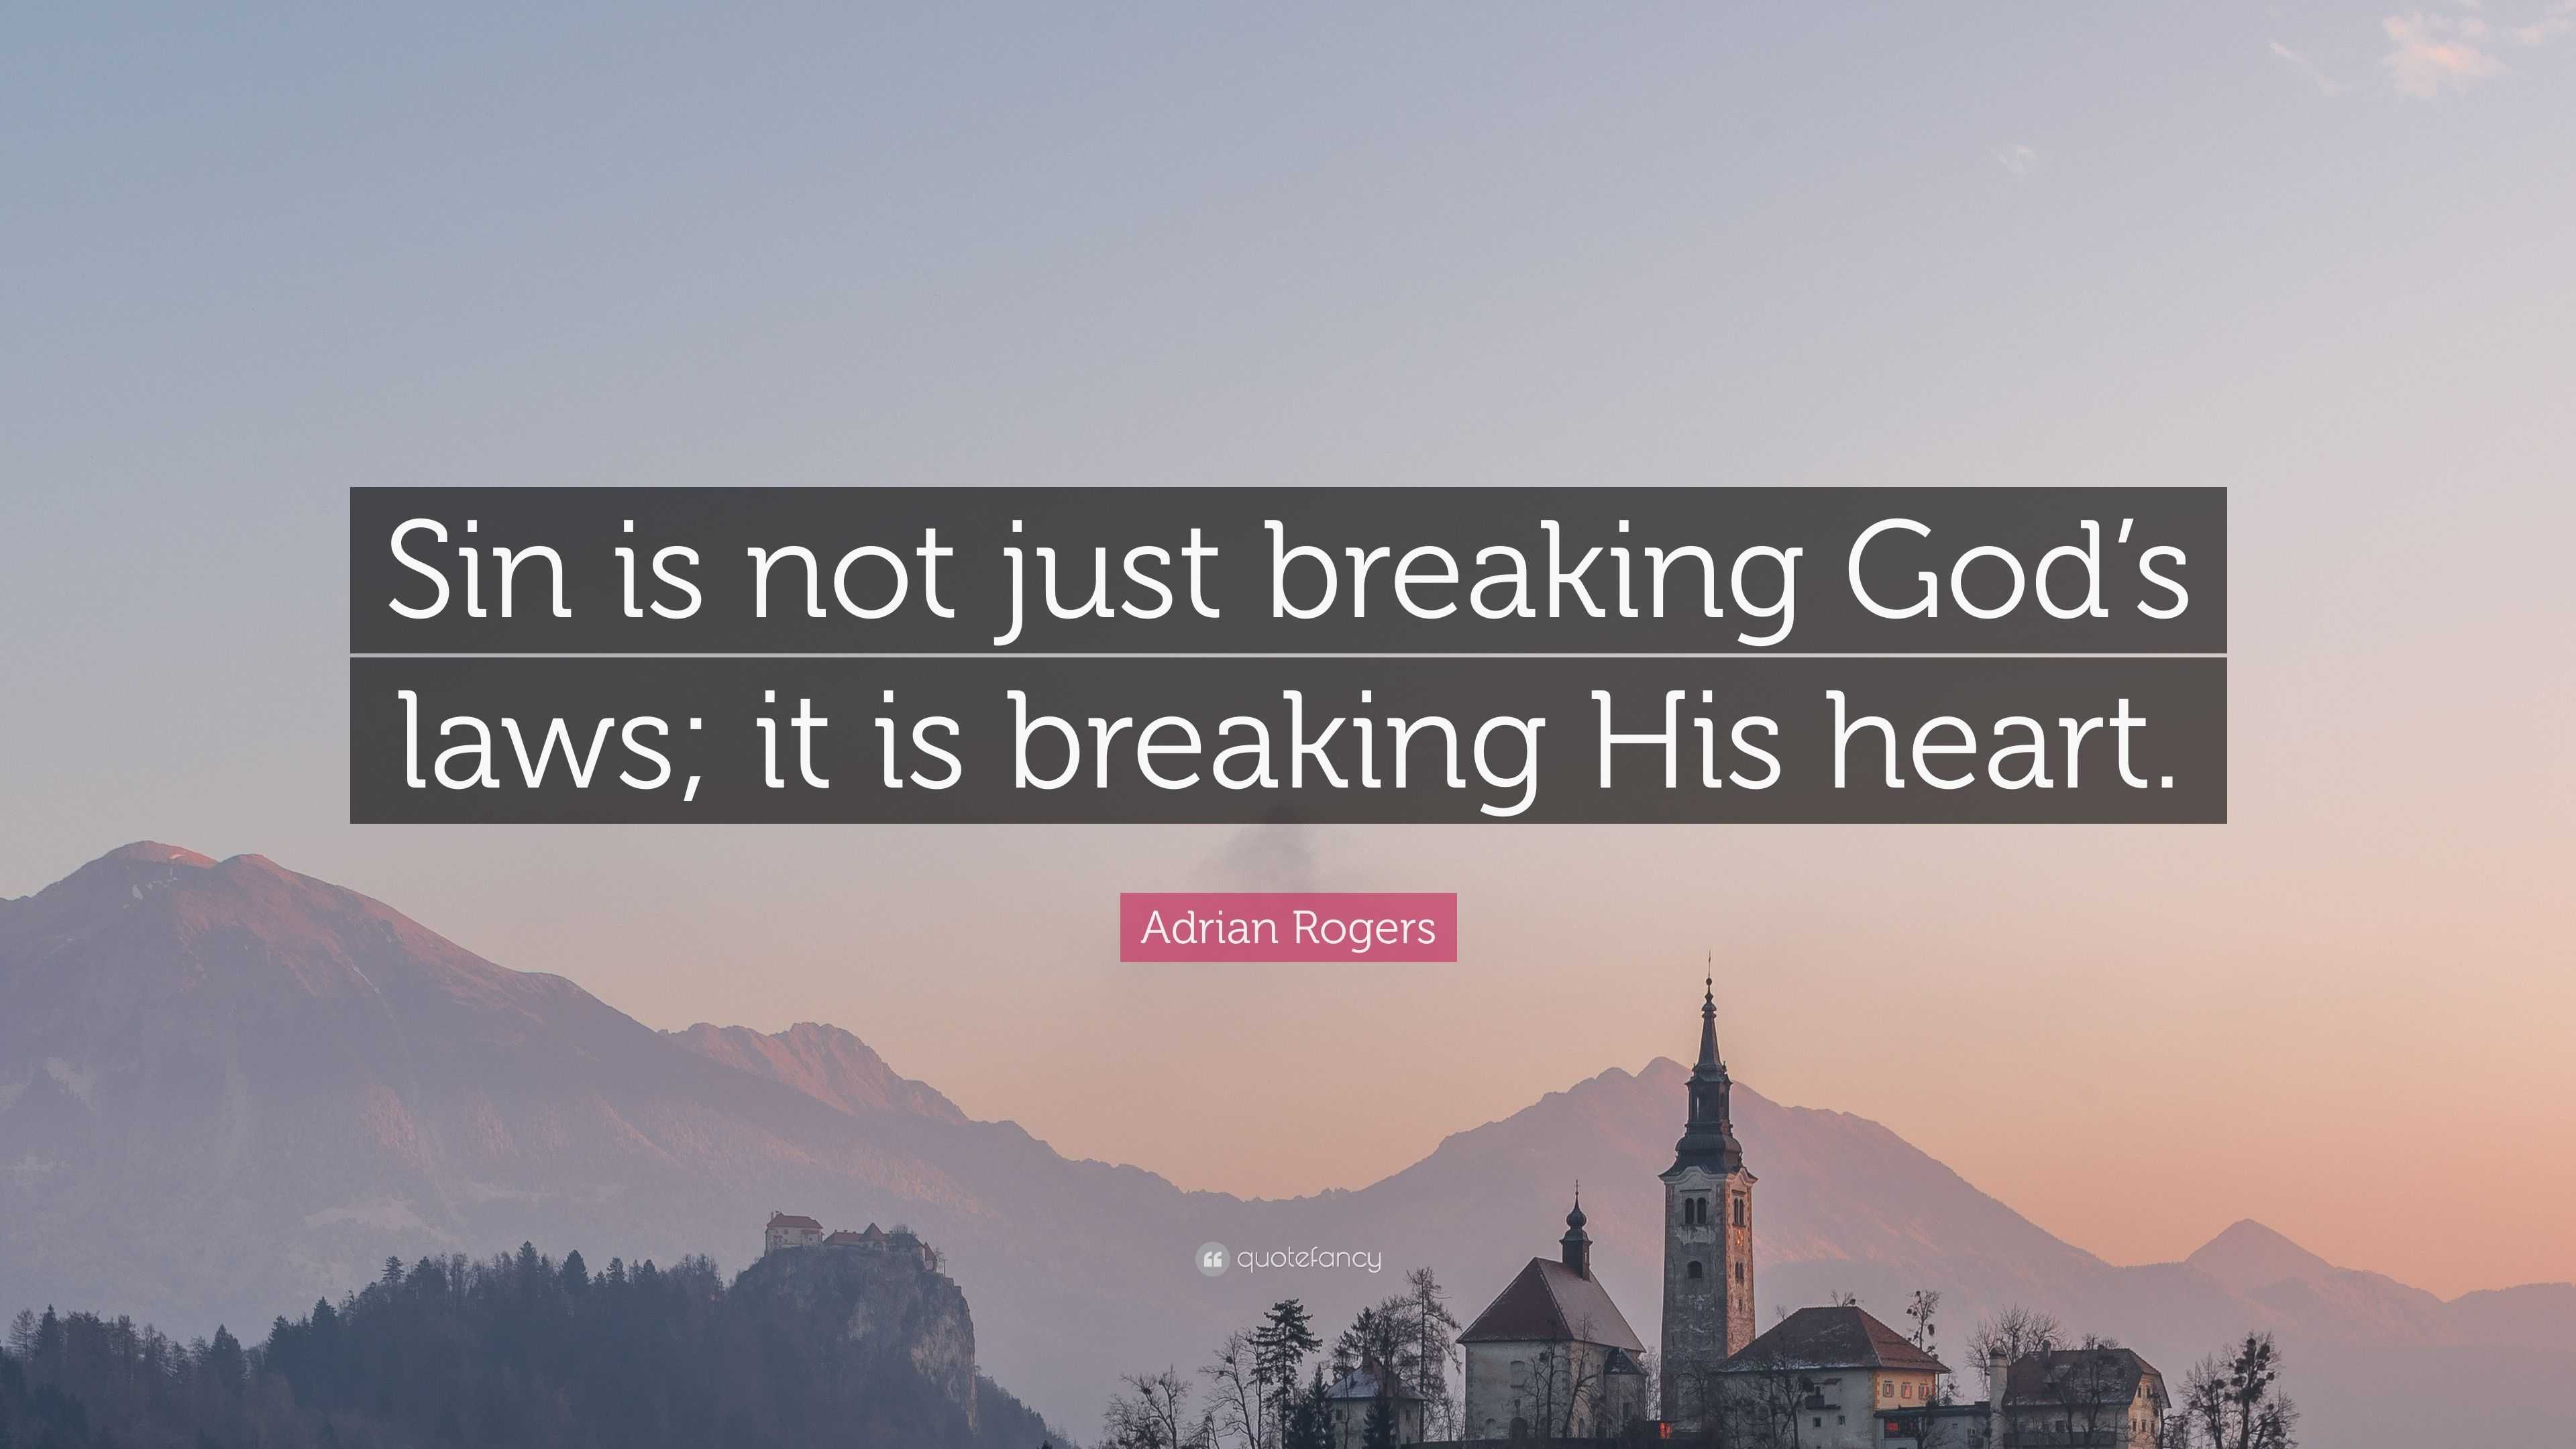 Adrian Rogers Quote: “Sin is not just breaking God's laws; it is breaking  His heart.”